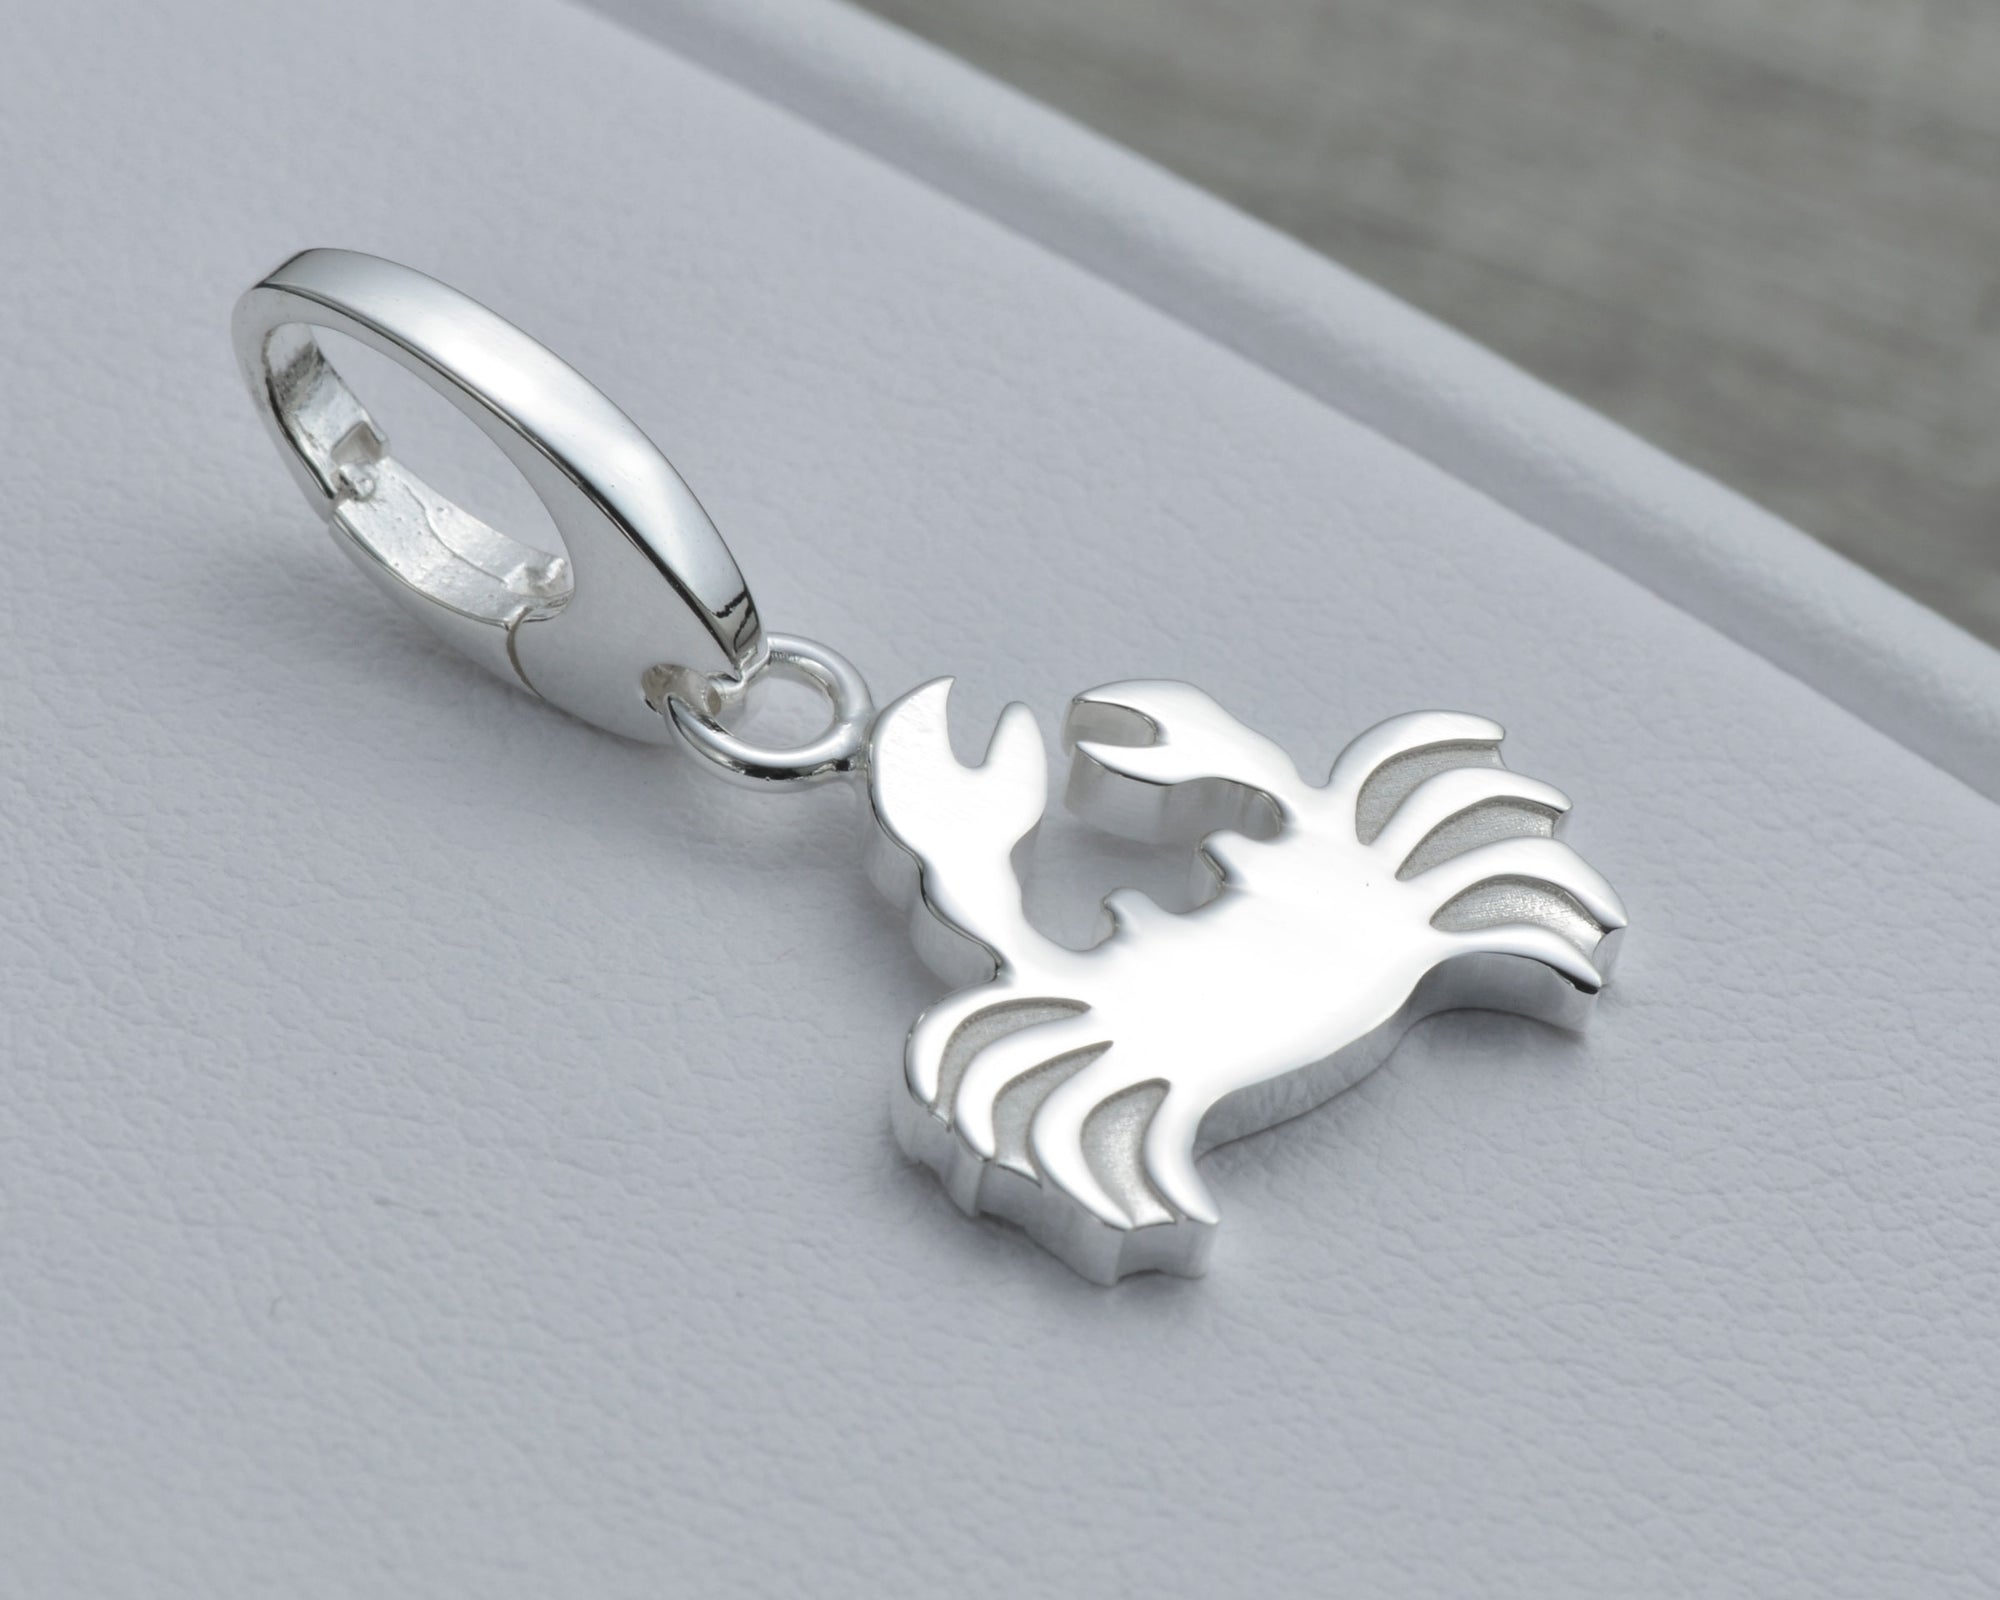 CRAB CHARM IN STERLING SILVER